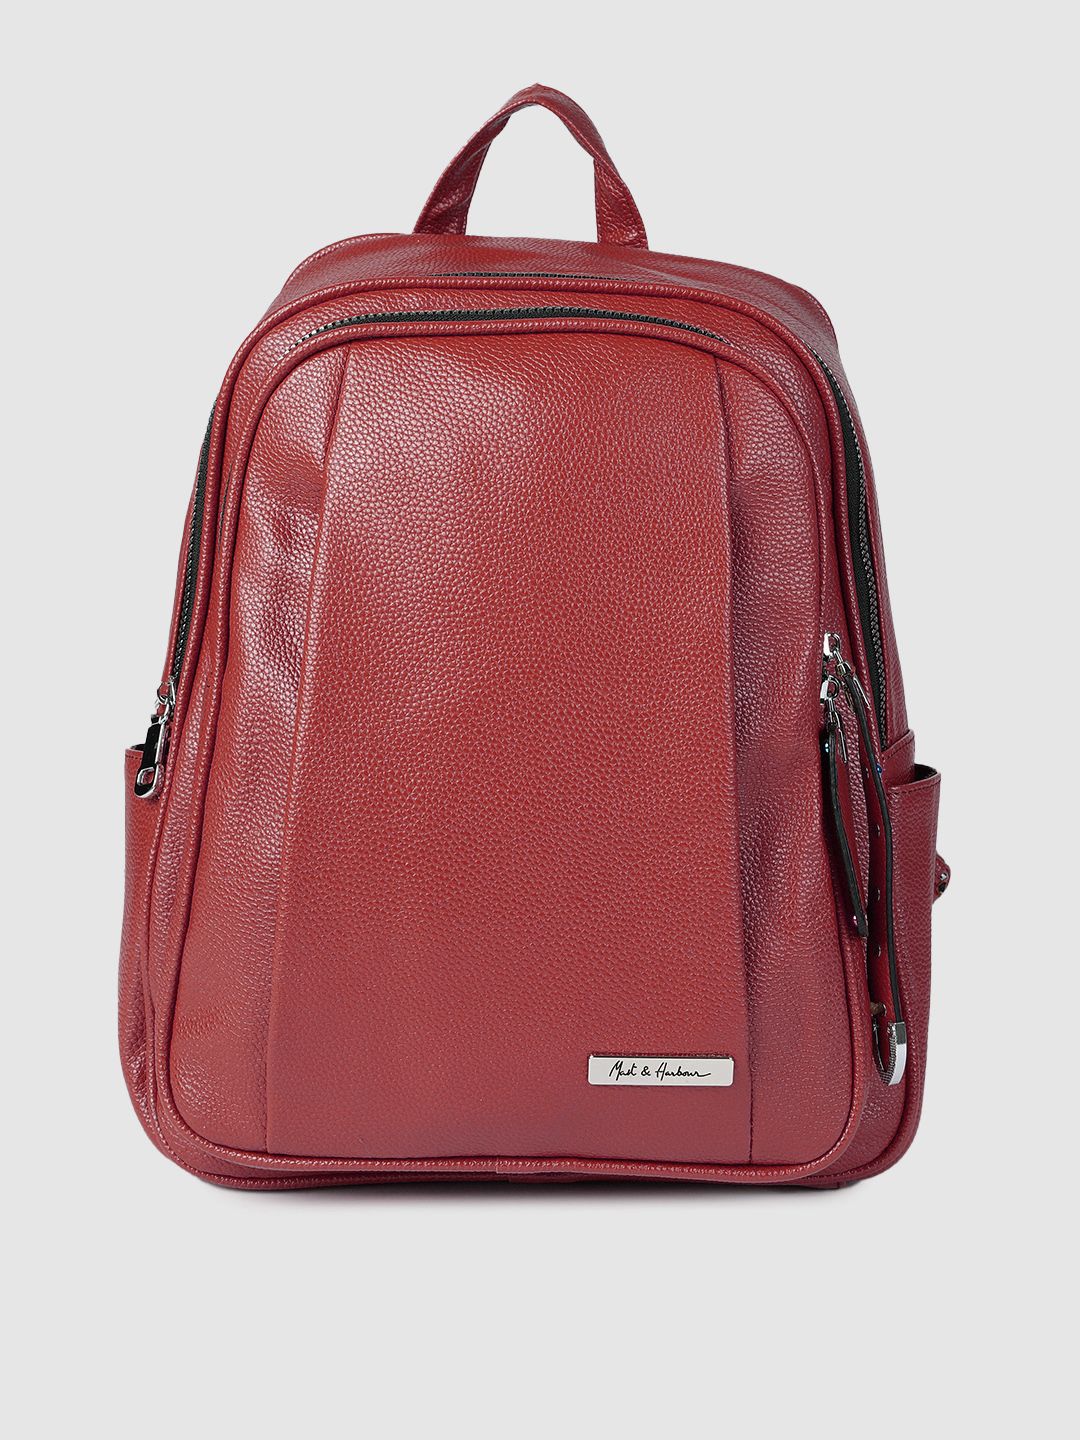 Mast & Harbour Women Red Backpack Price in India